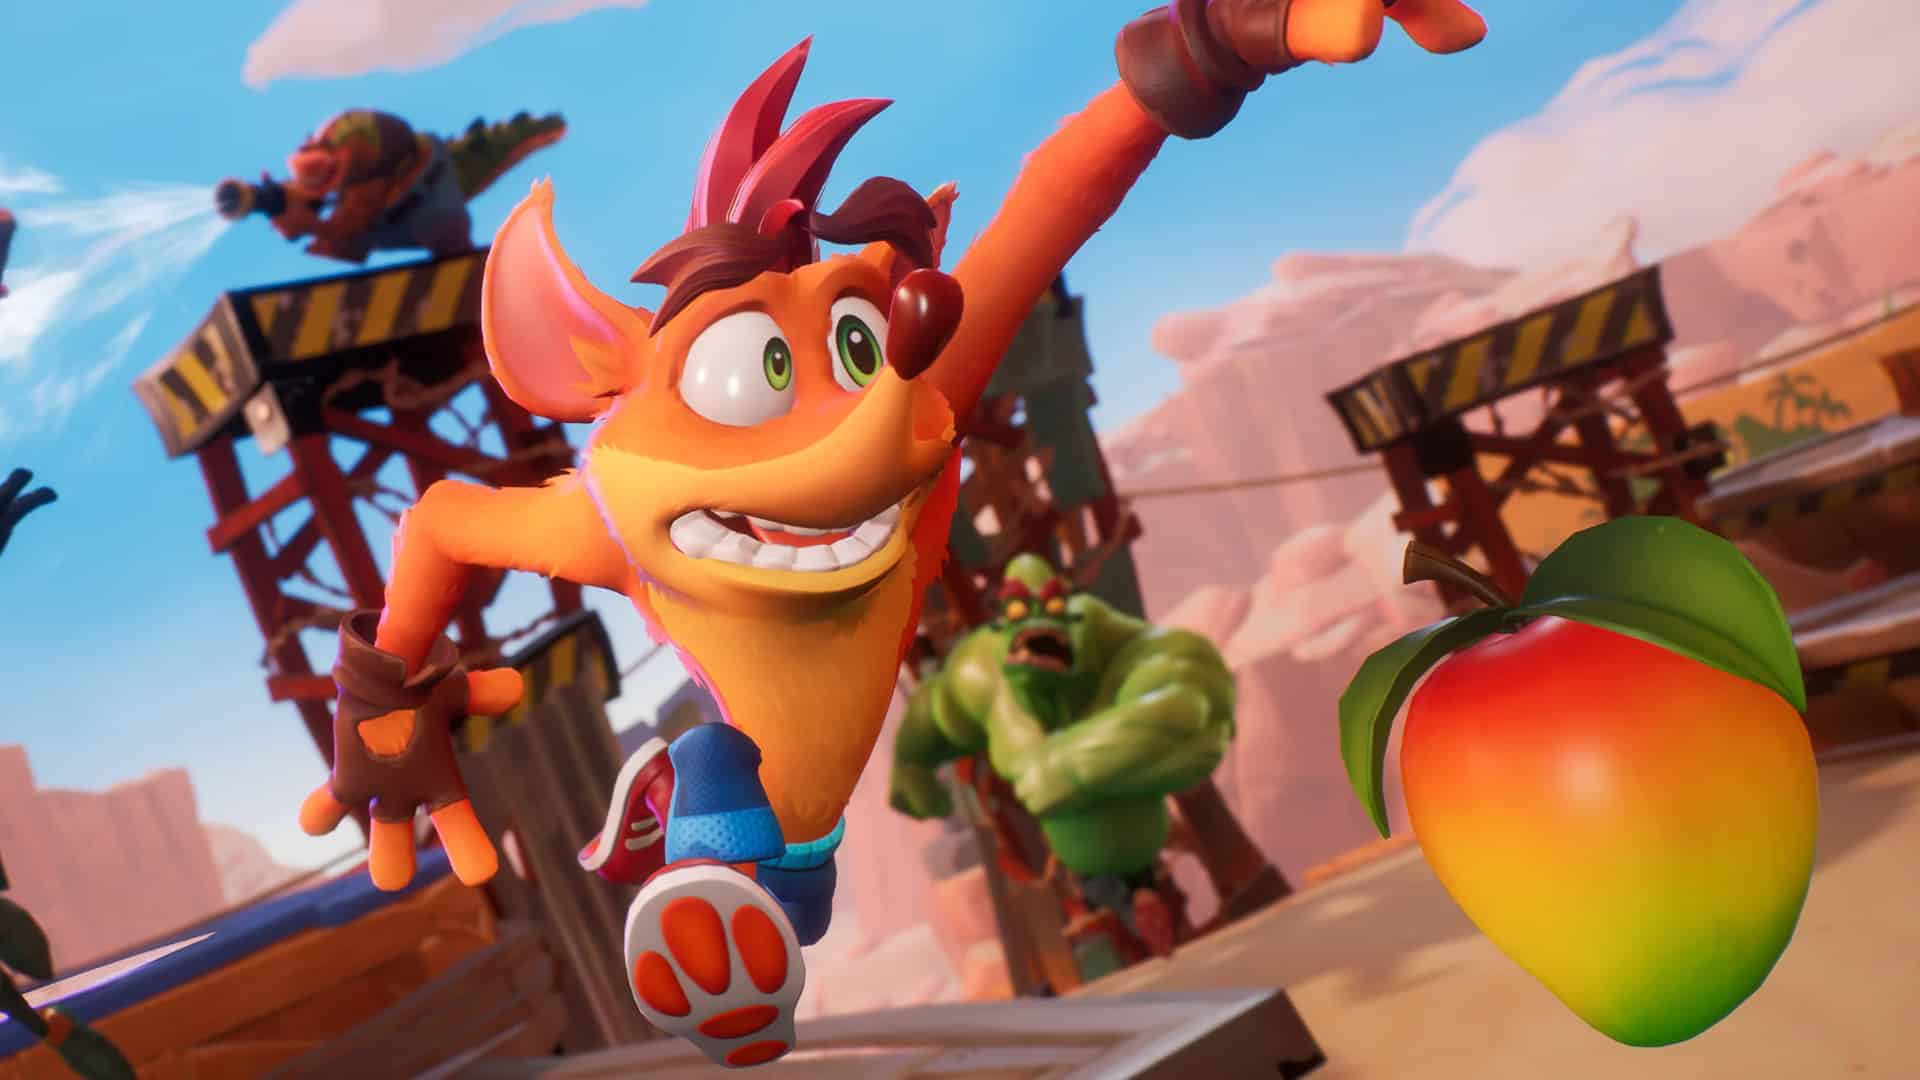 Everything you need to know about Crash Team Rumble